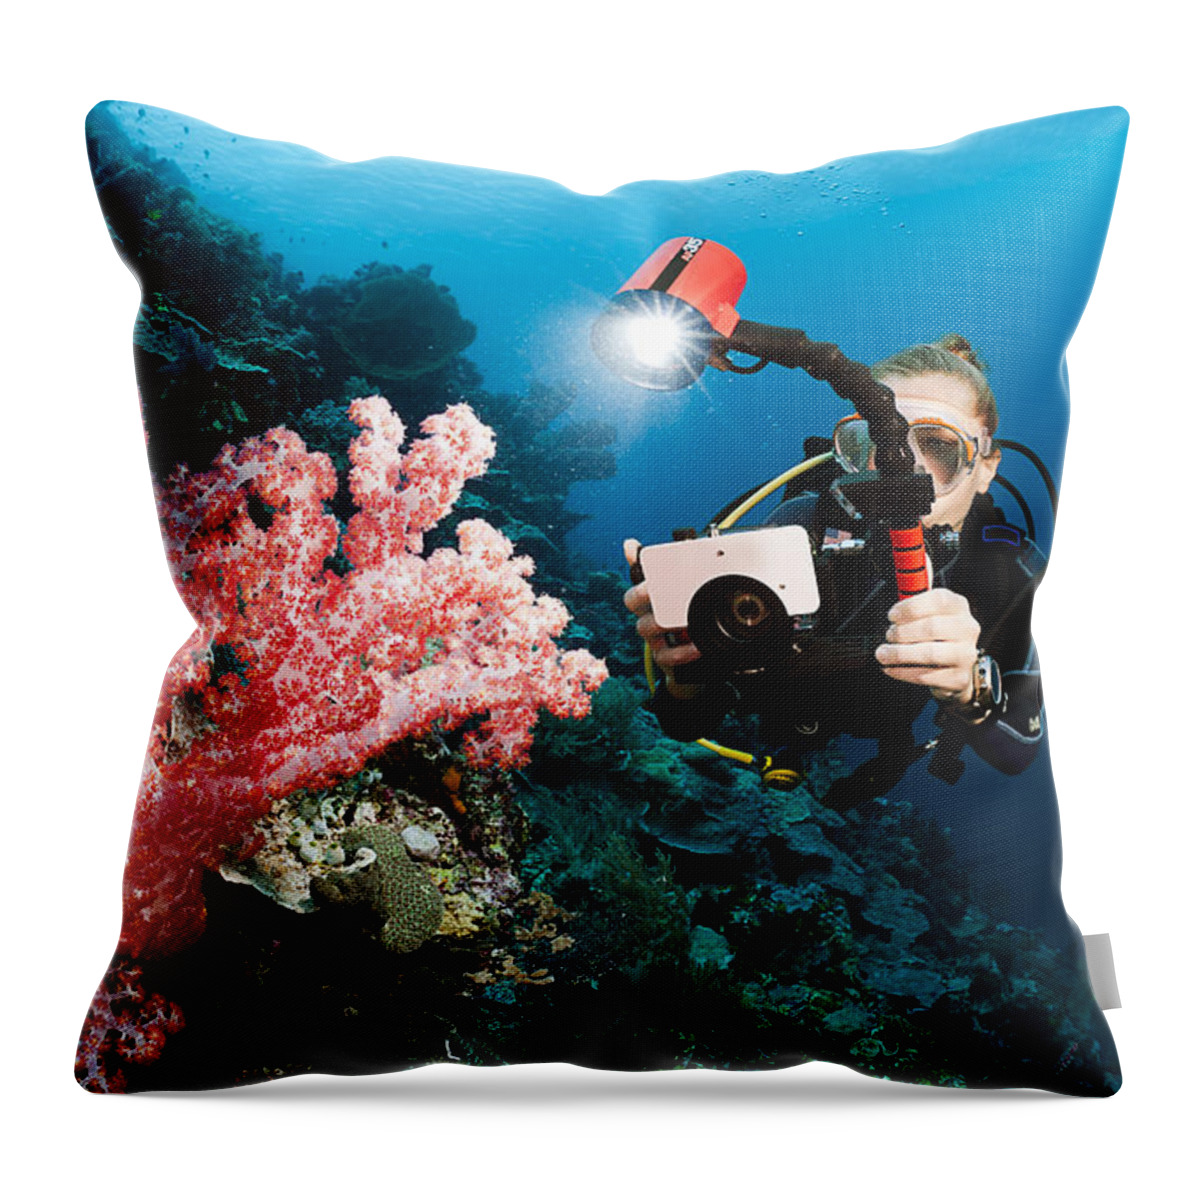 Awesome Throw Pillow featuring the photograph Diver Photographing Soft Coral by Dave Fleetham